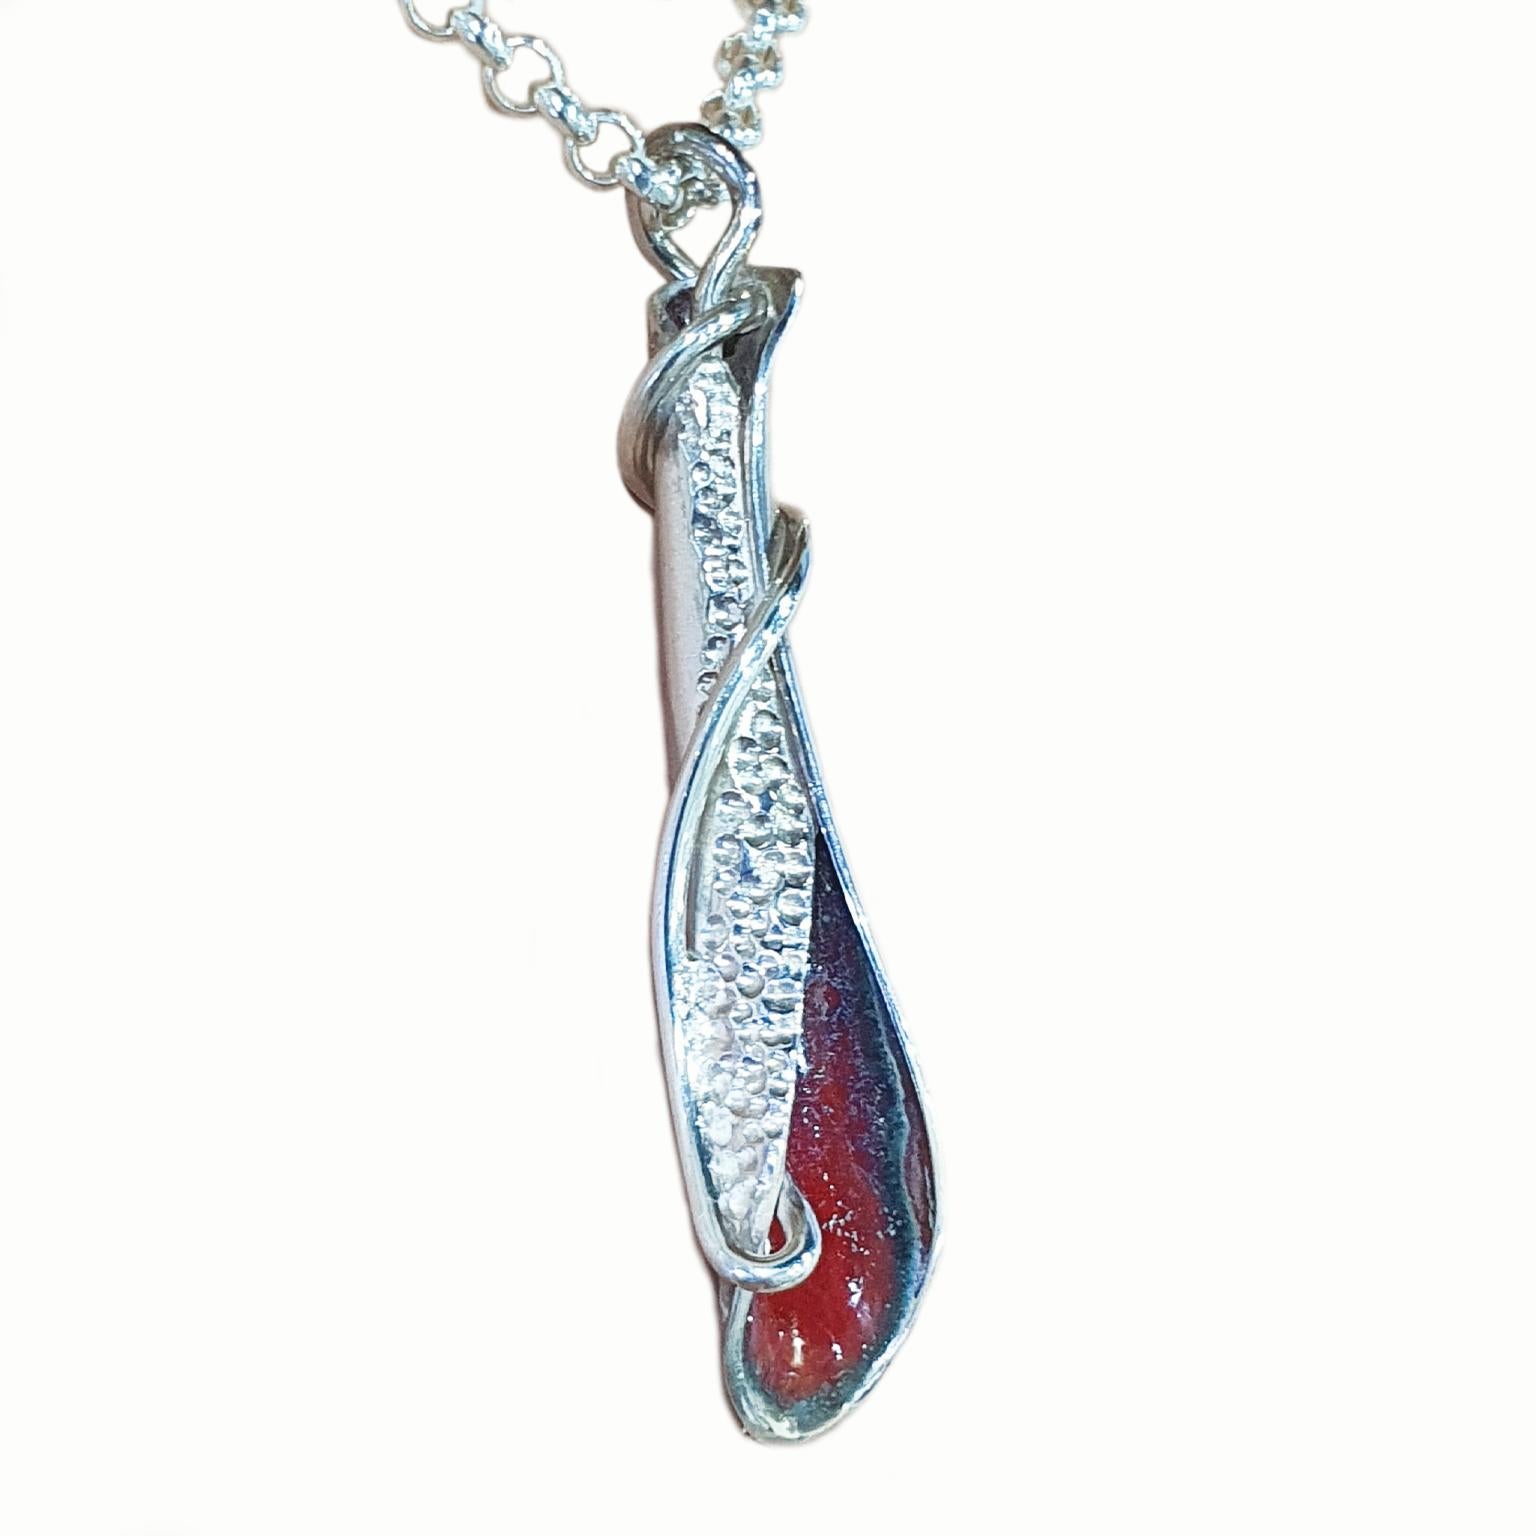 Artisan Paul Amey Sterling Silver and Red Enamel Leaf Pendant